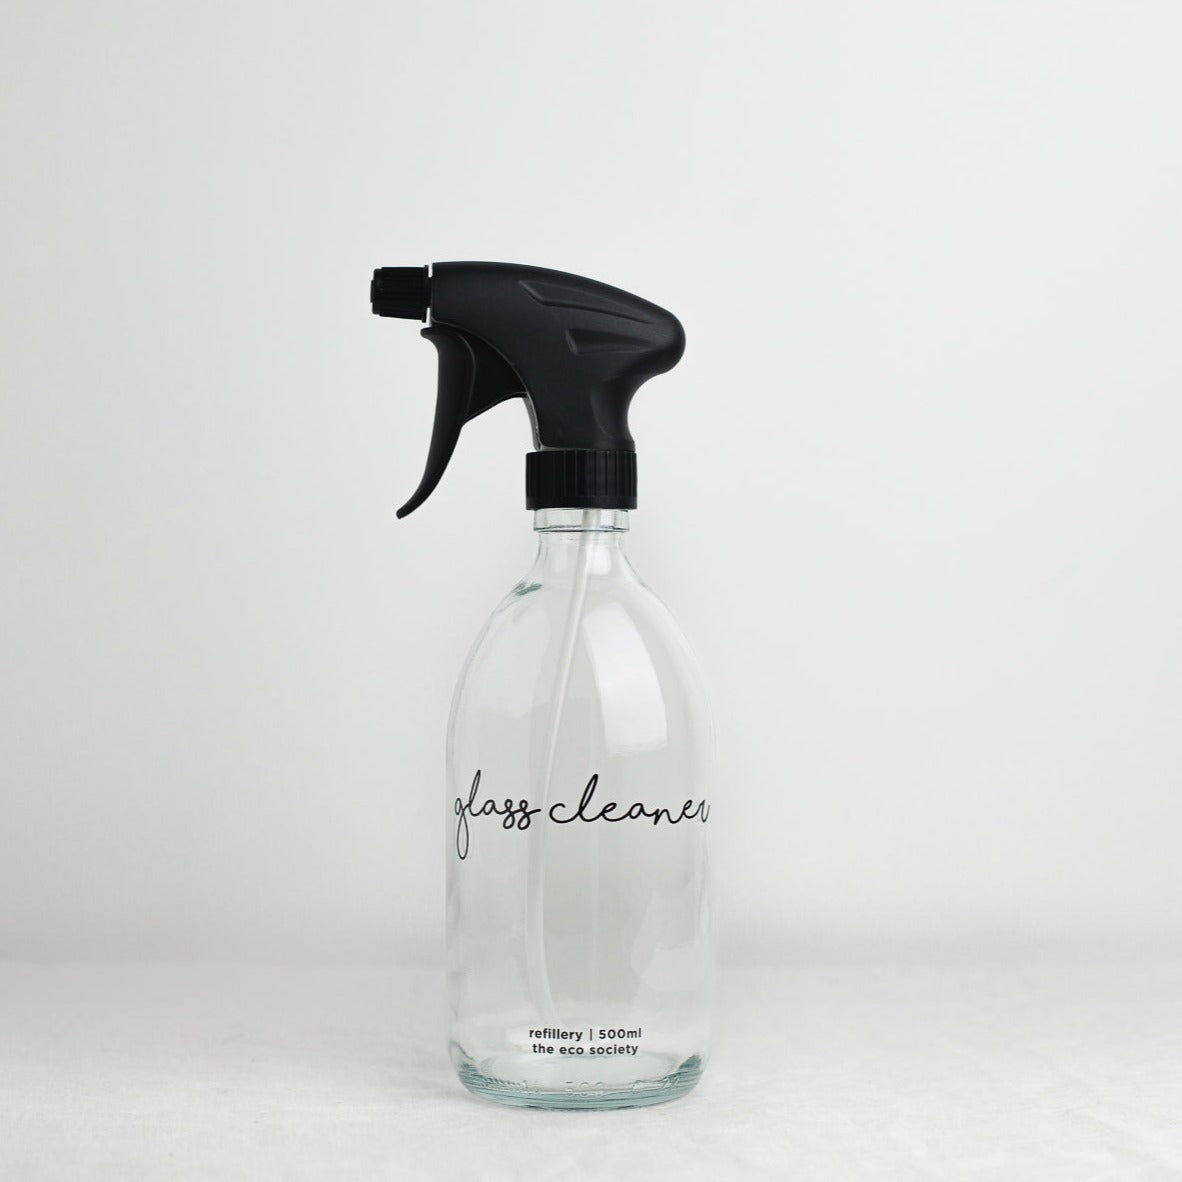 Clear Glass Bottle with Black printed text "Glass Cleaner" 500ml Refillery Bottle